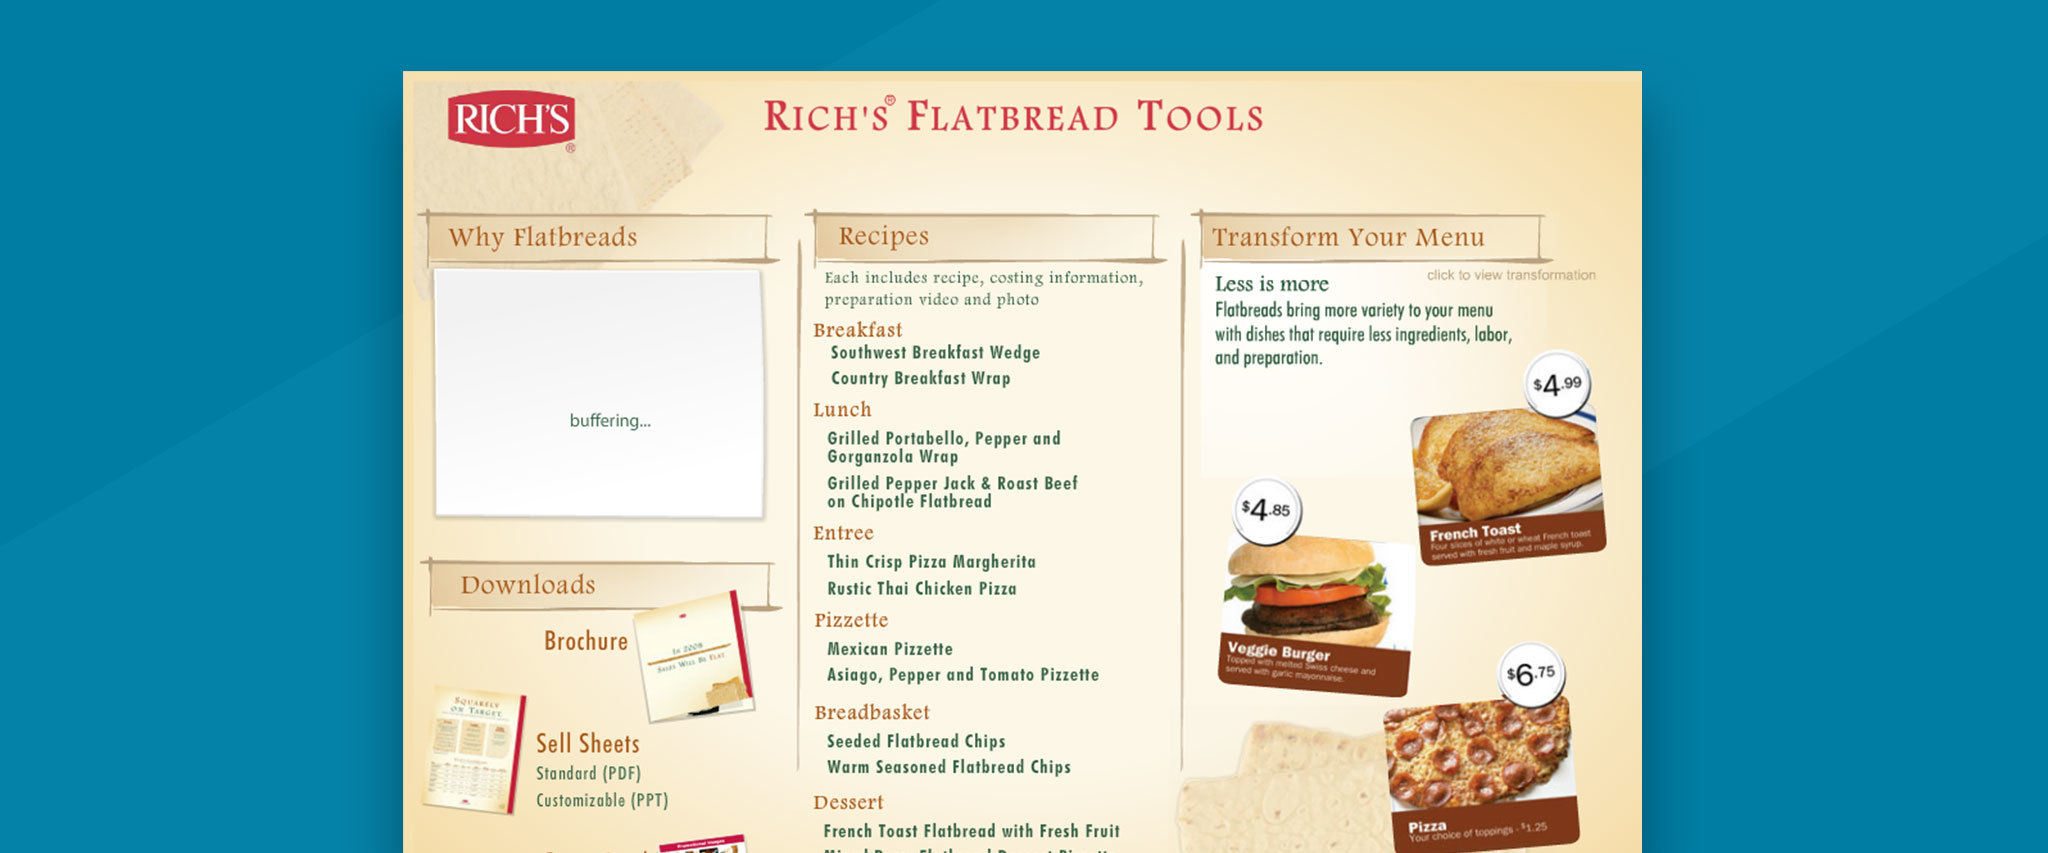 Rich Products: Flatbread Tools Gallery